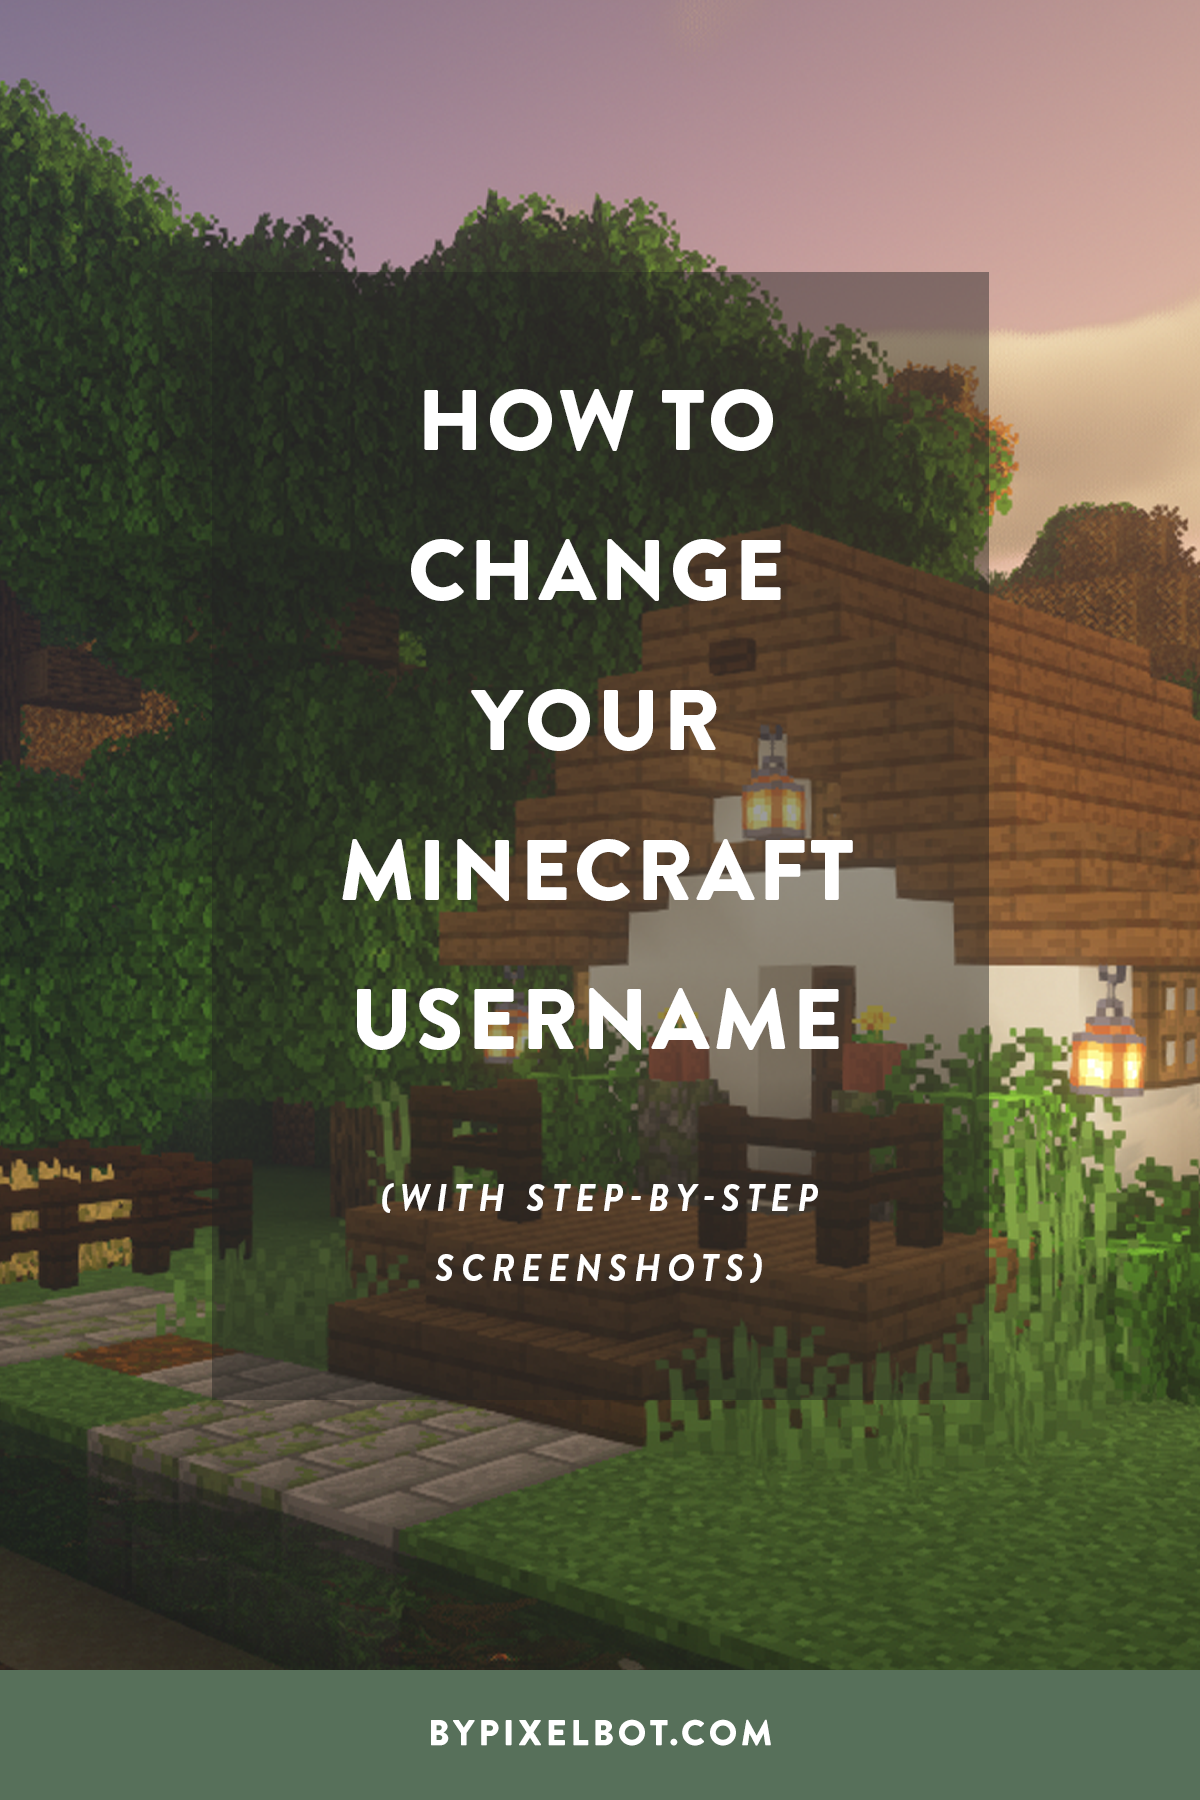 How to Change Your Minecraft Name (With Step-by-Step Screenshot Instructions) — ByPixelbot